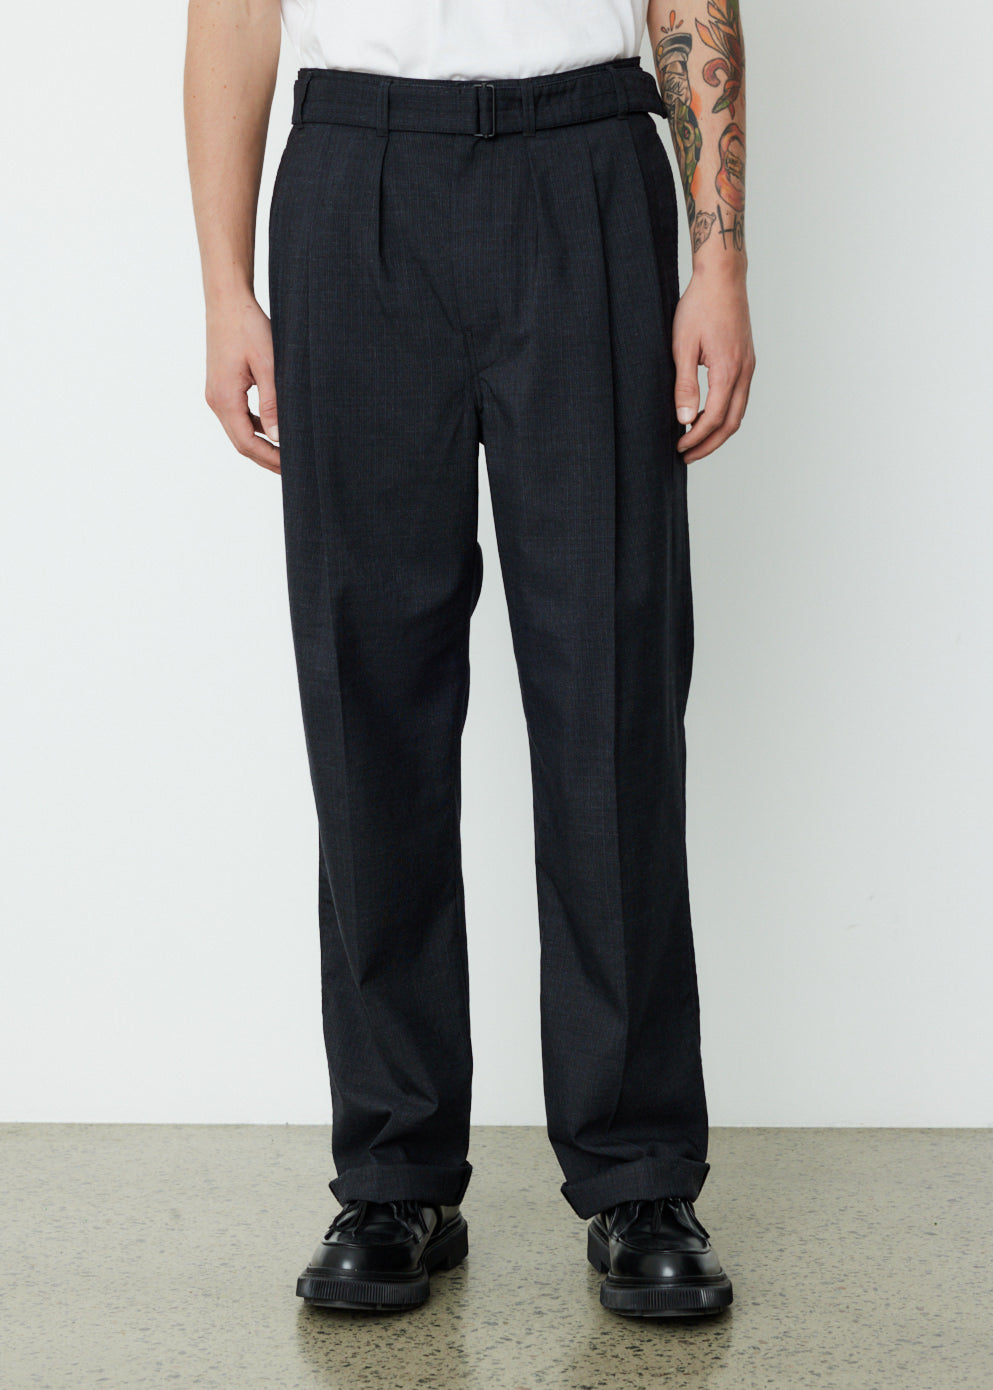 Dauphin Pleated Pant, Bottoms, Pants